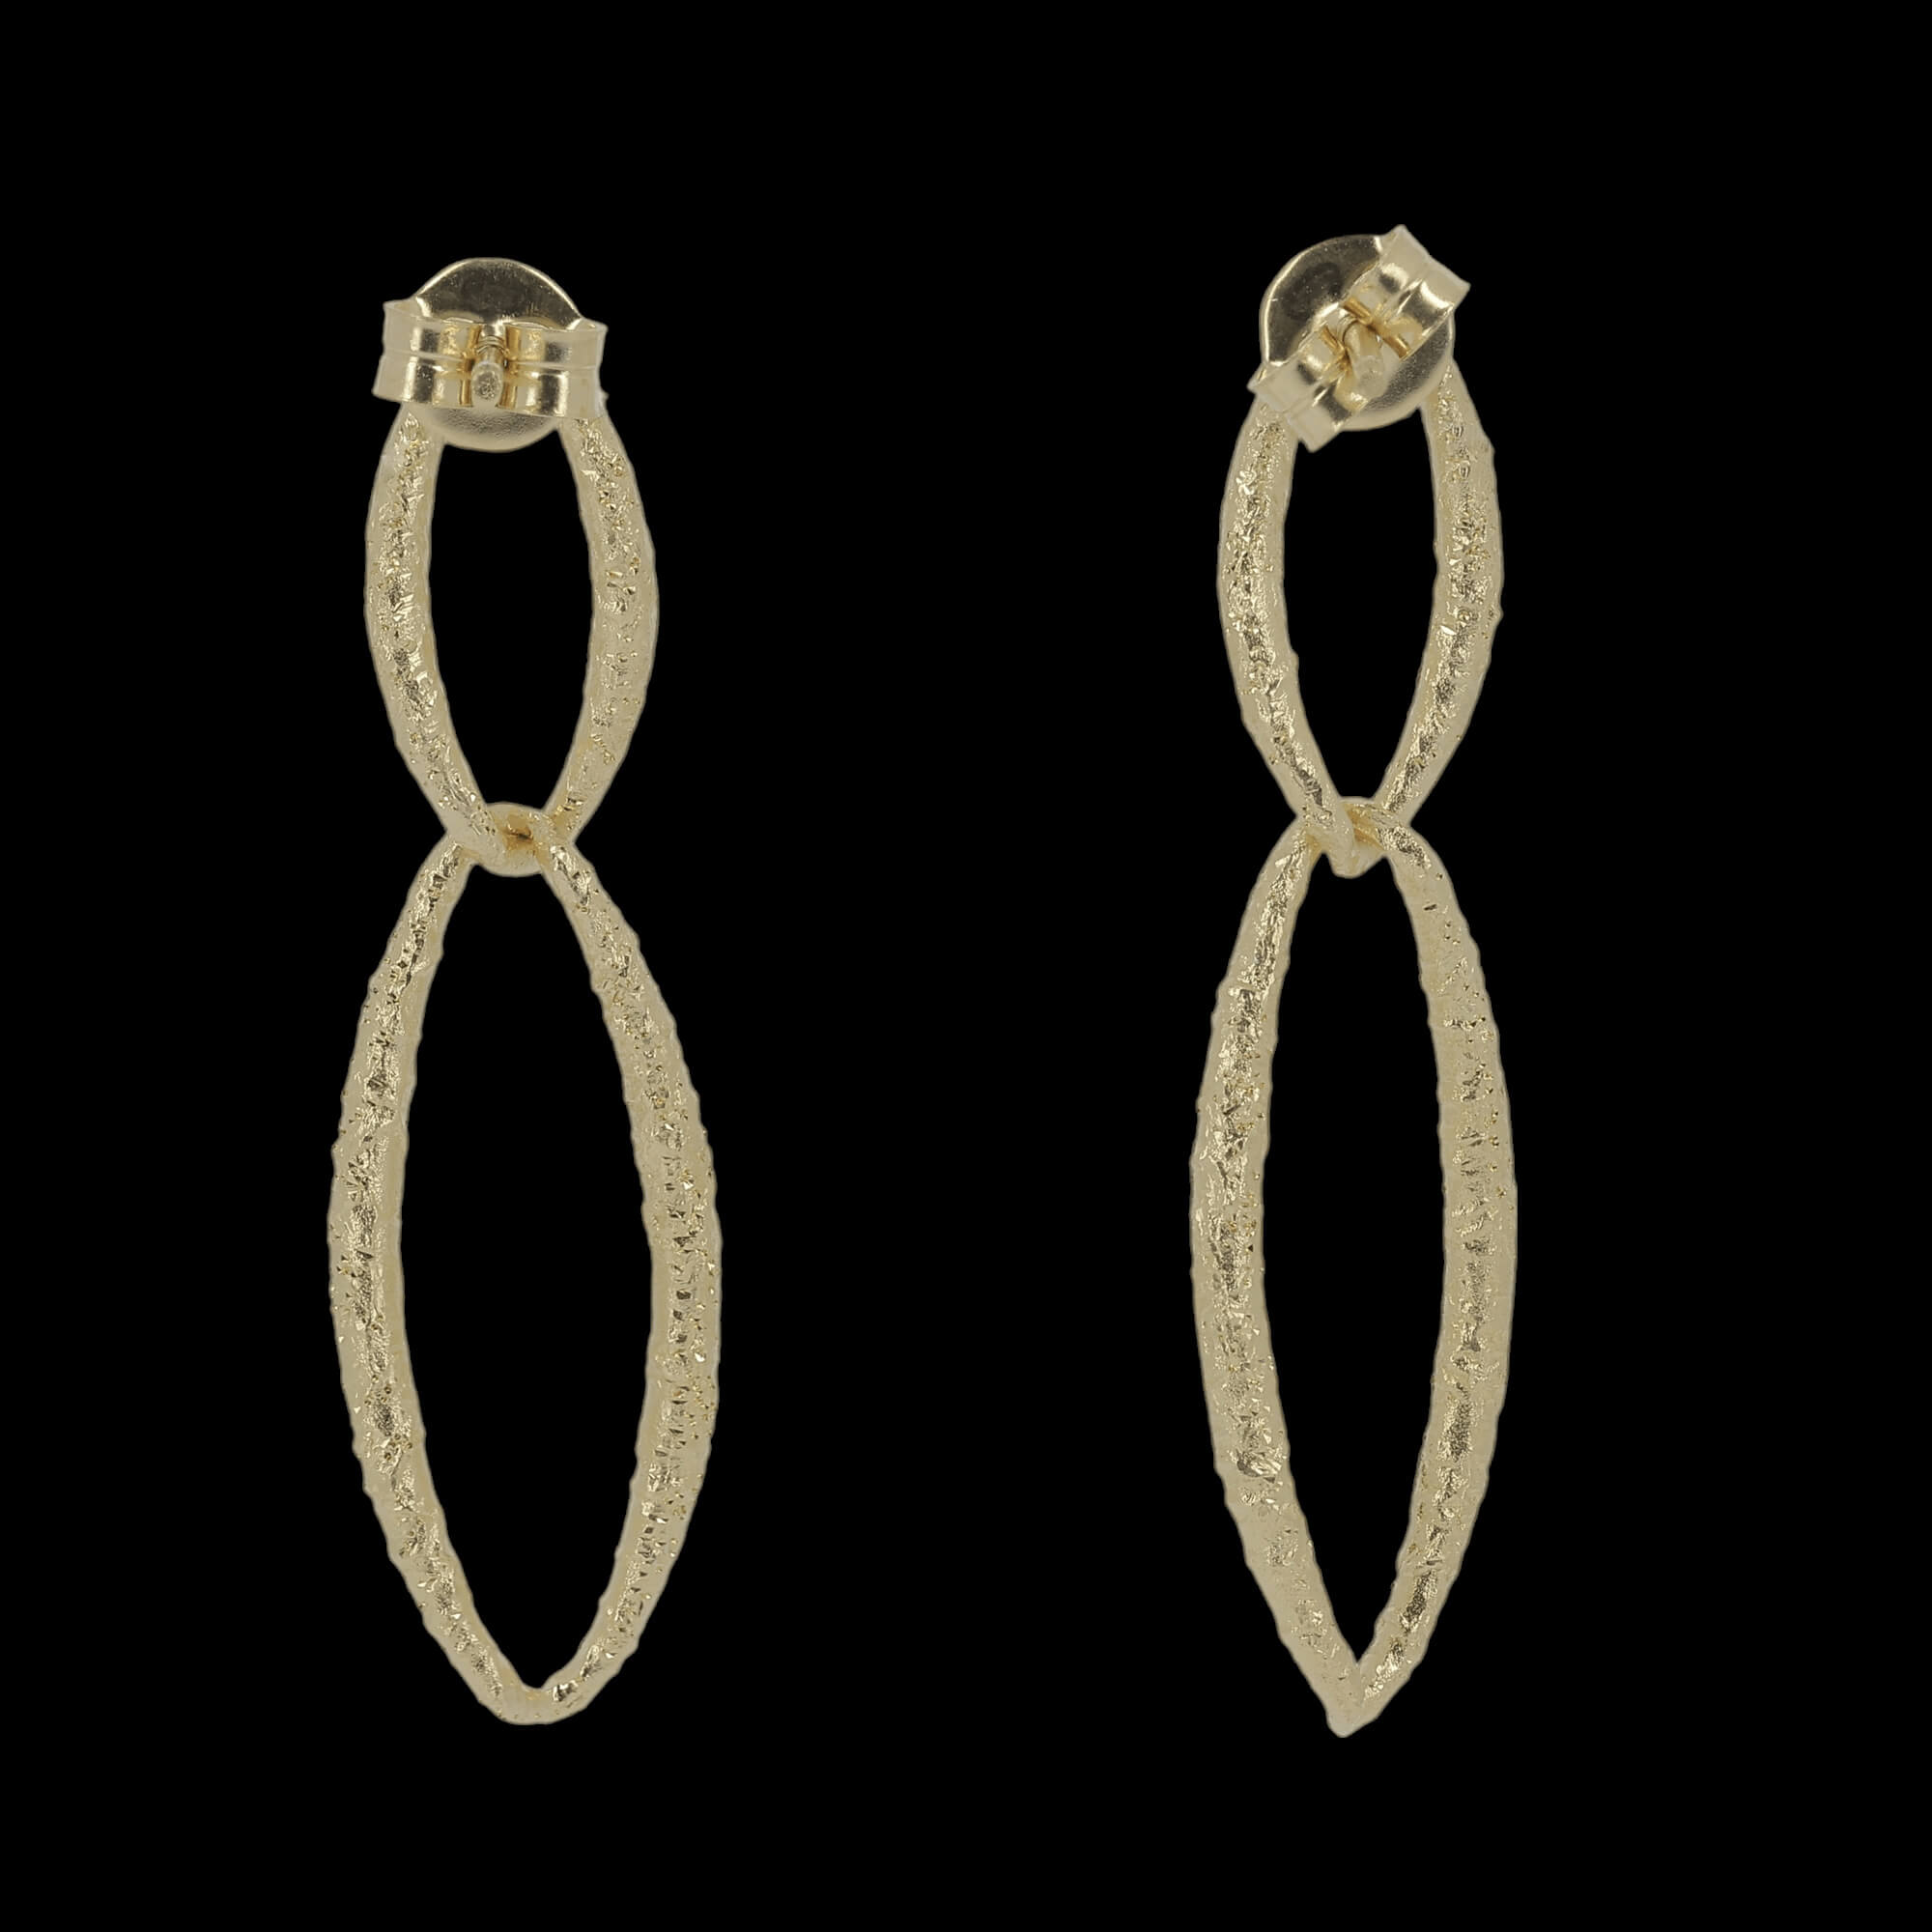 Gold-plated and beautiful link earrings